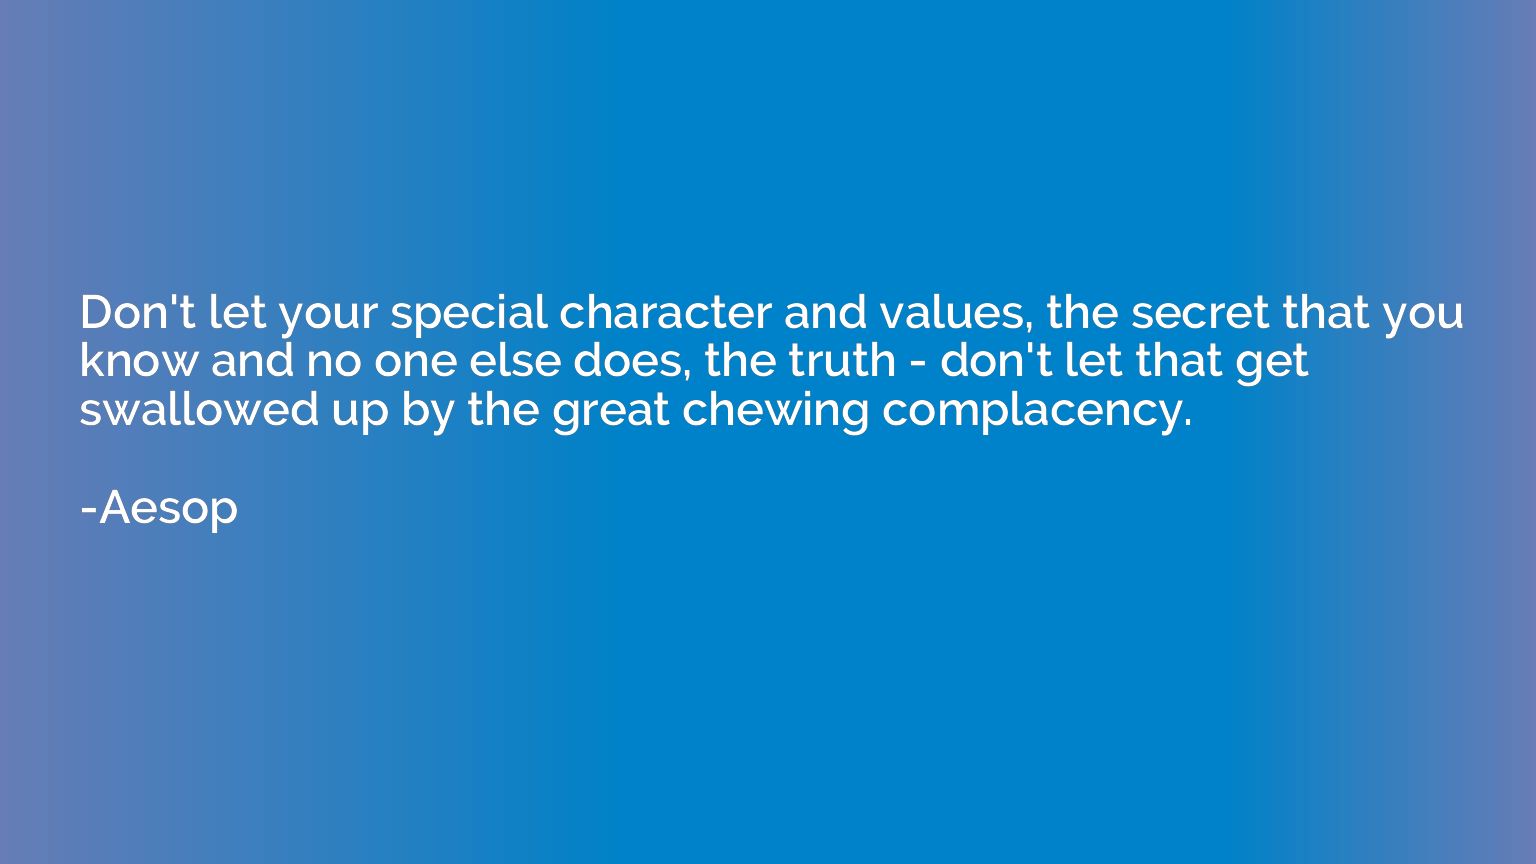 Don't let your special character and values, the secret that